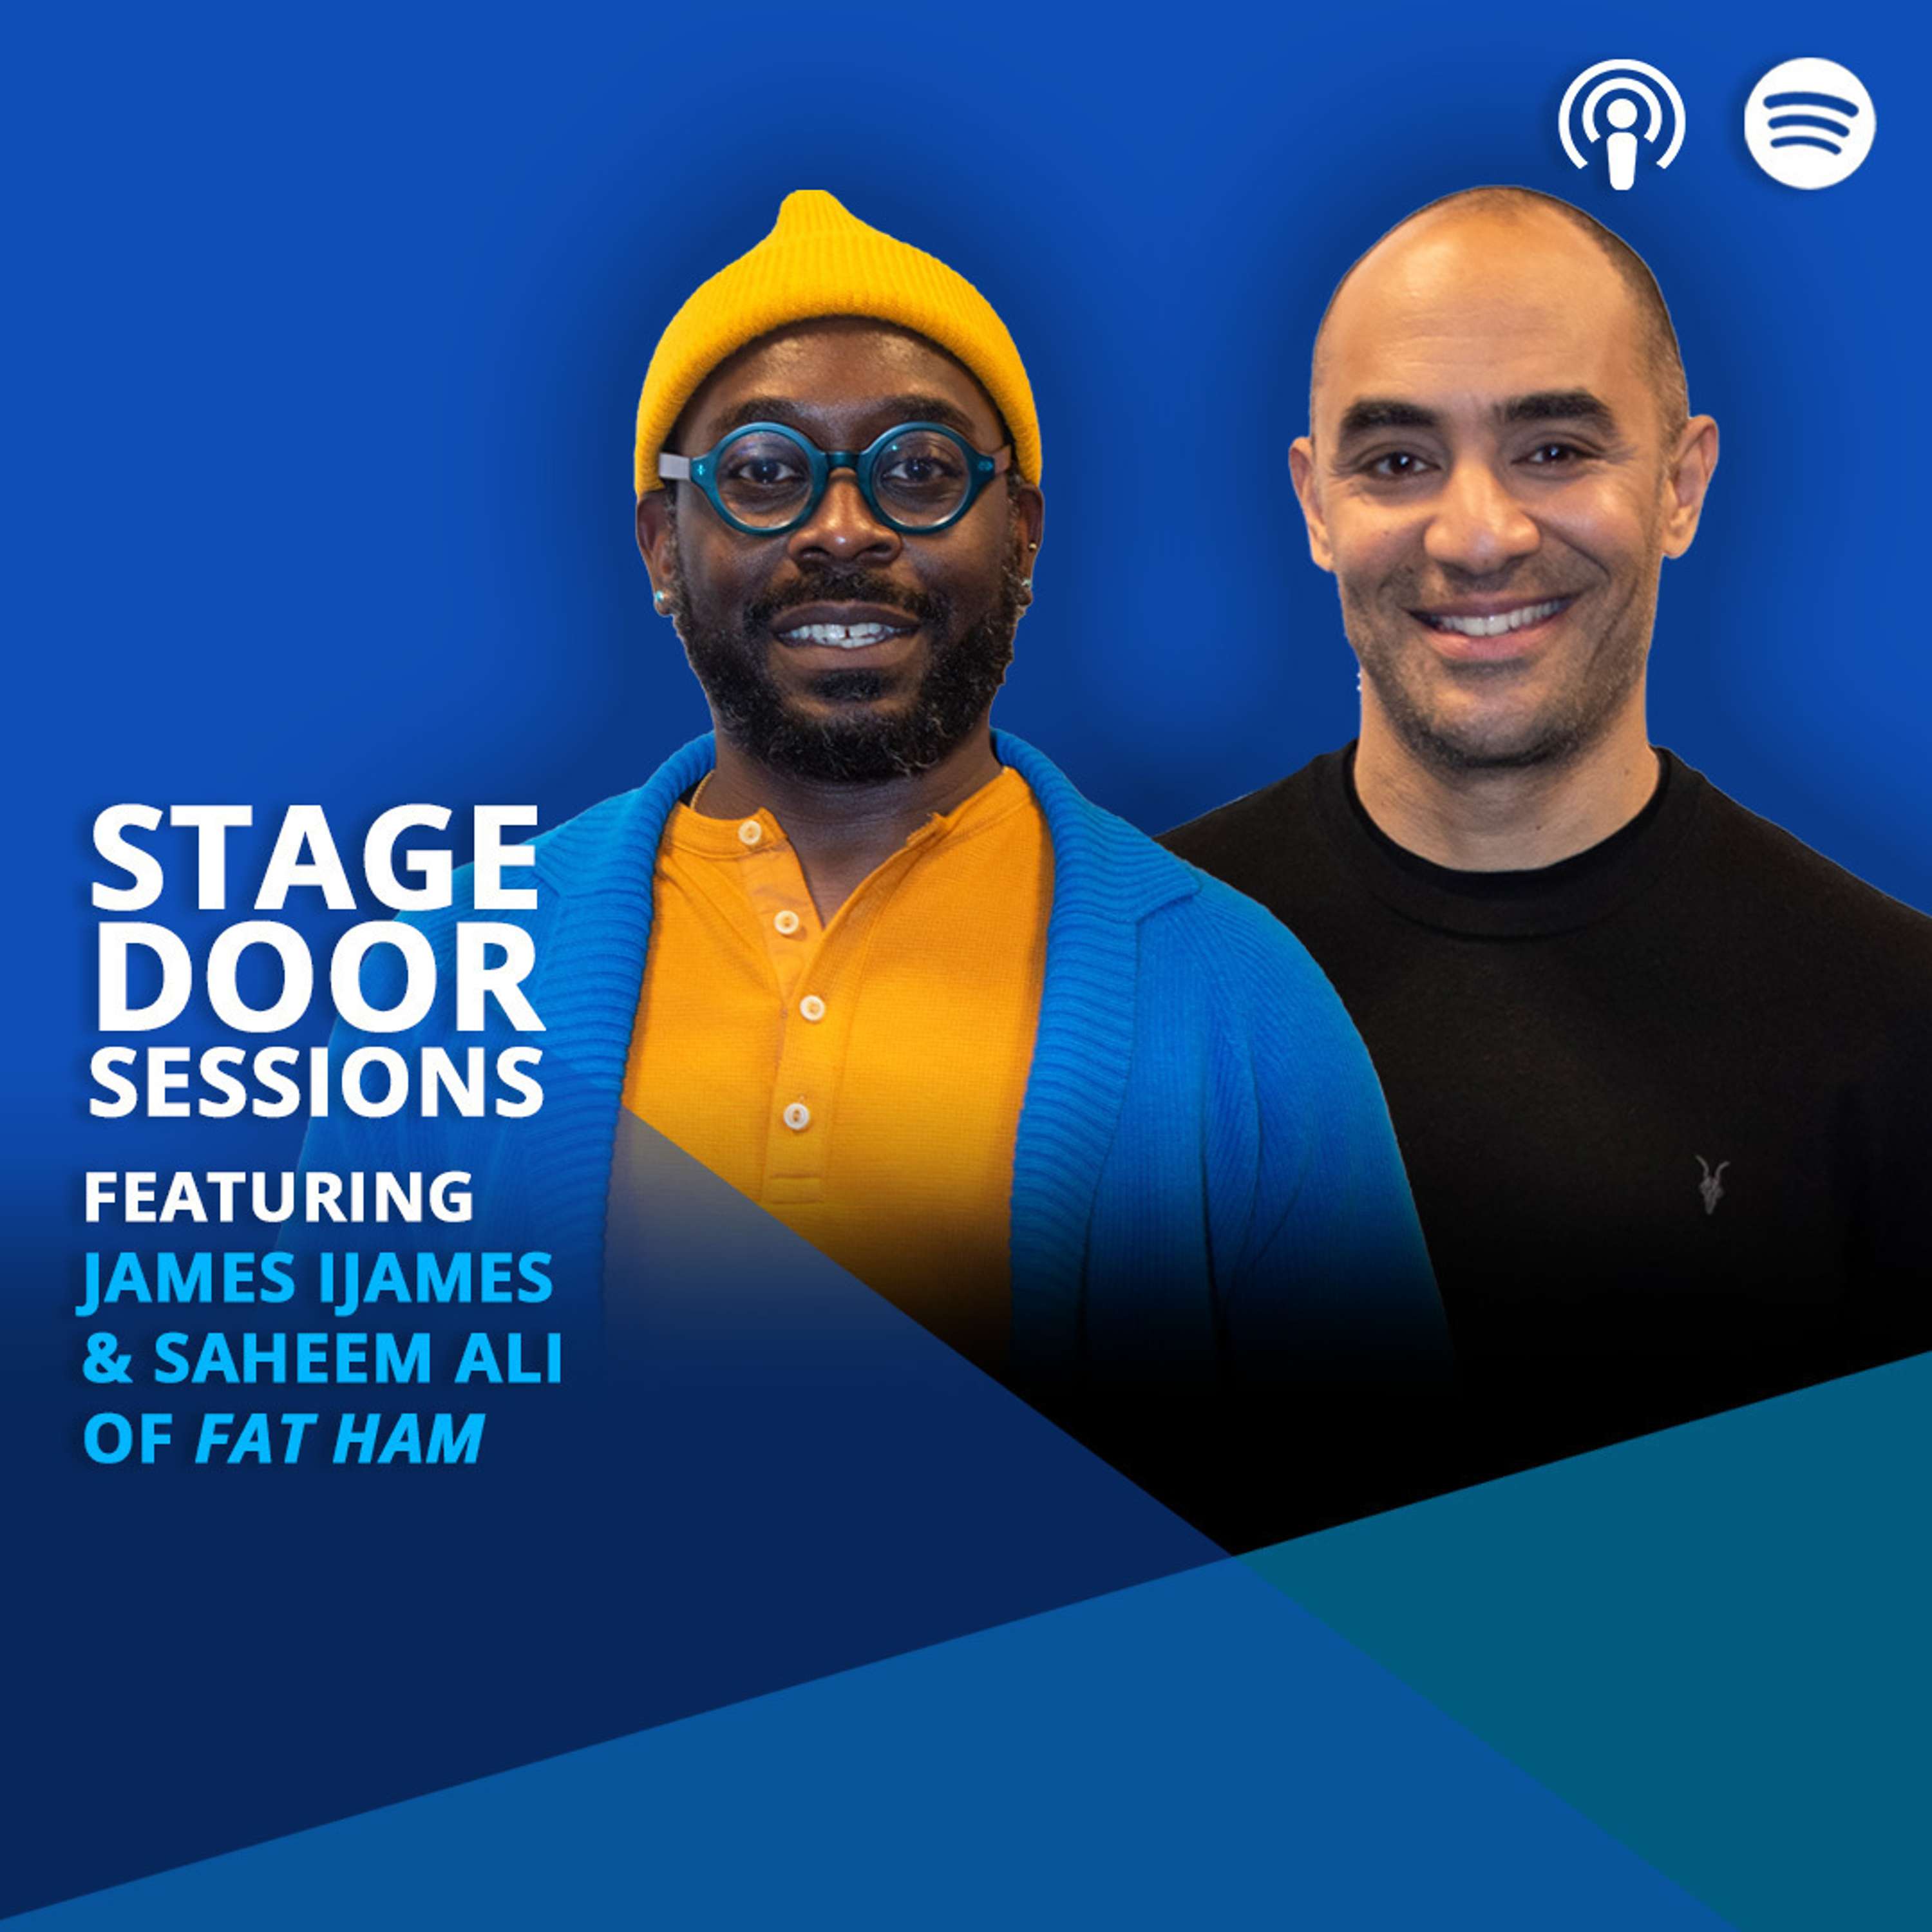 Fat Ham’s James Ijames and Saheem Ali on Shaking Up Shakespeare and Making Theater Feel Fresh and Alive